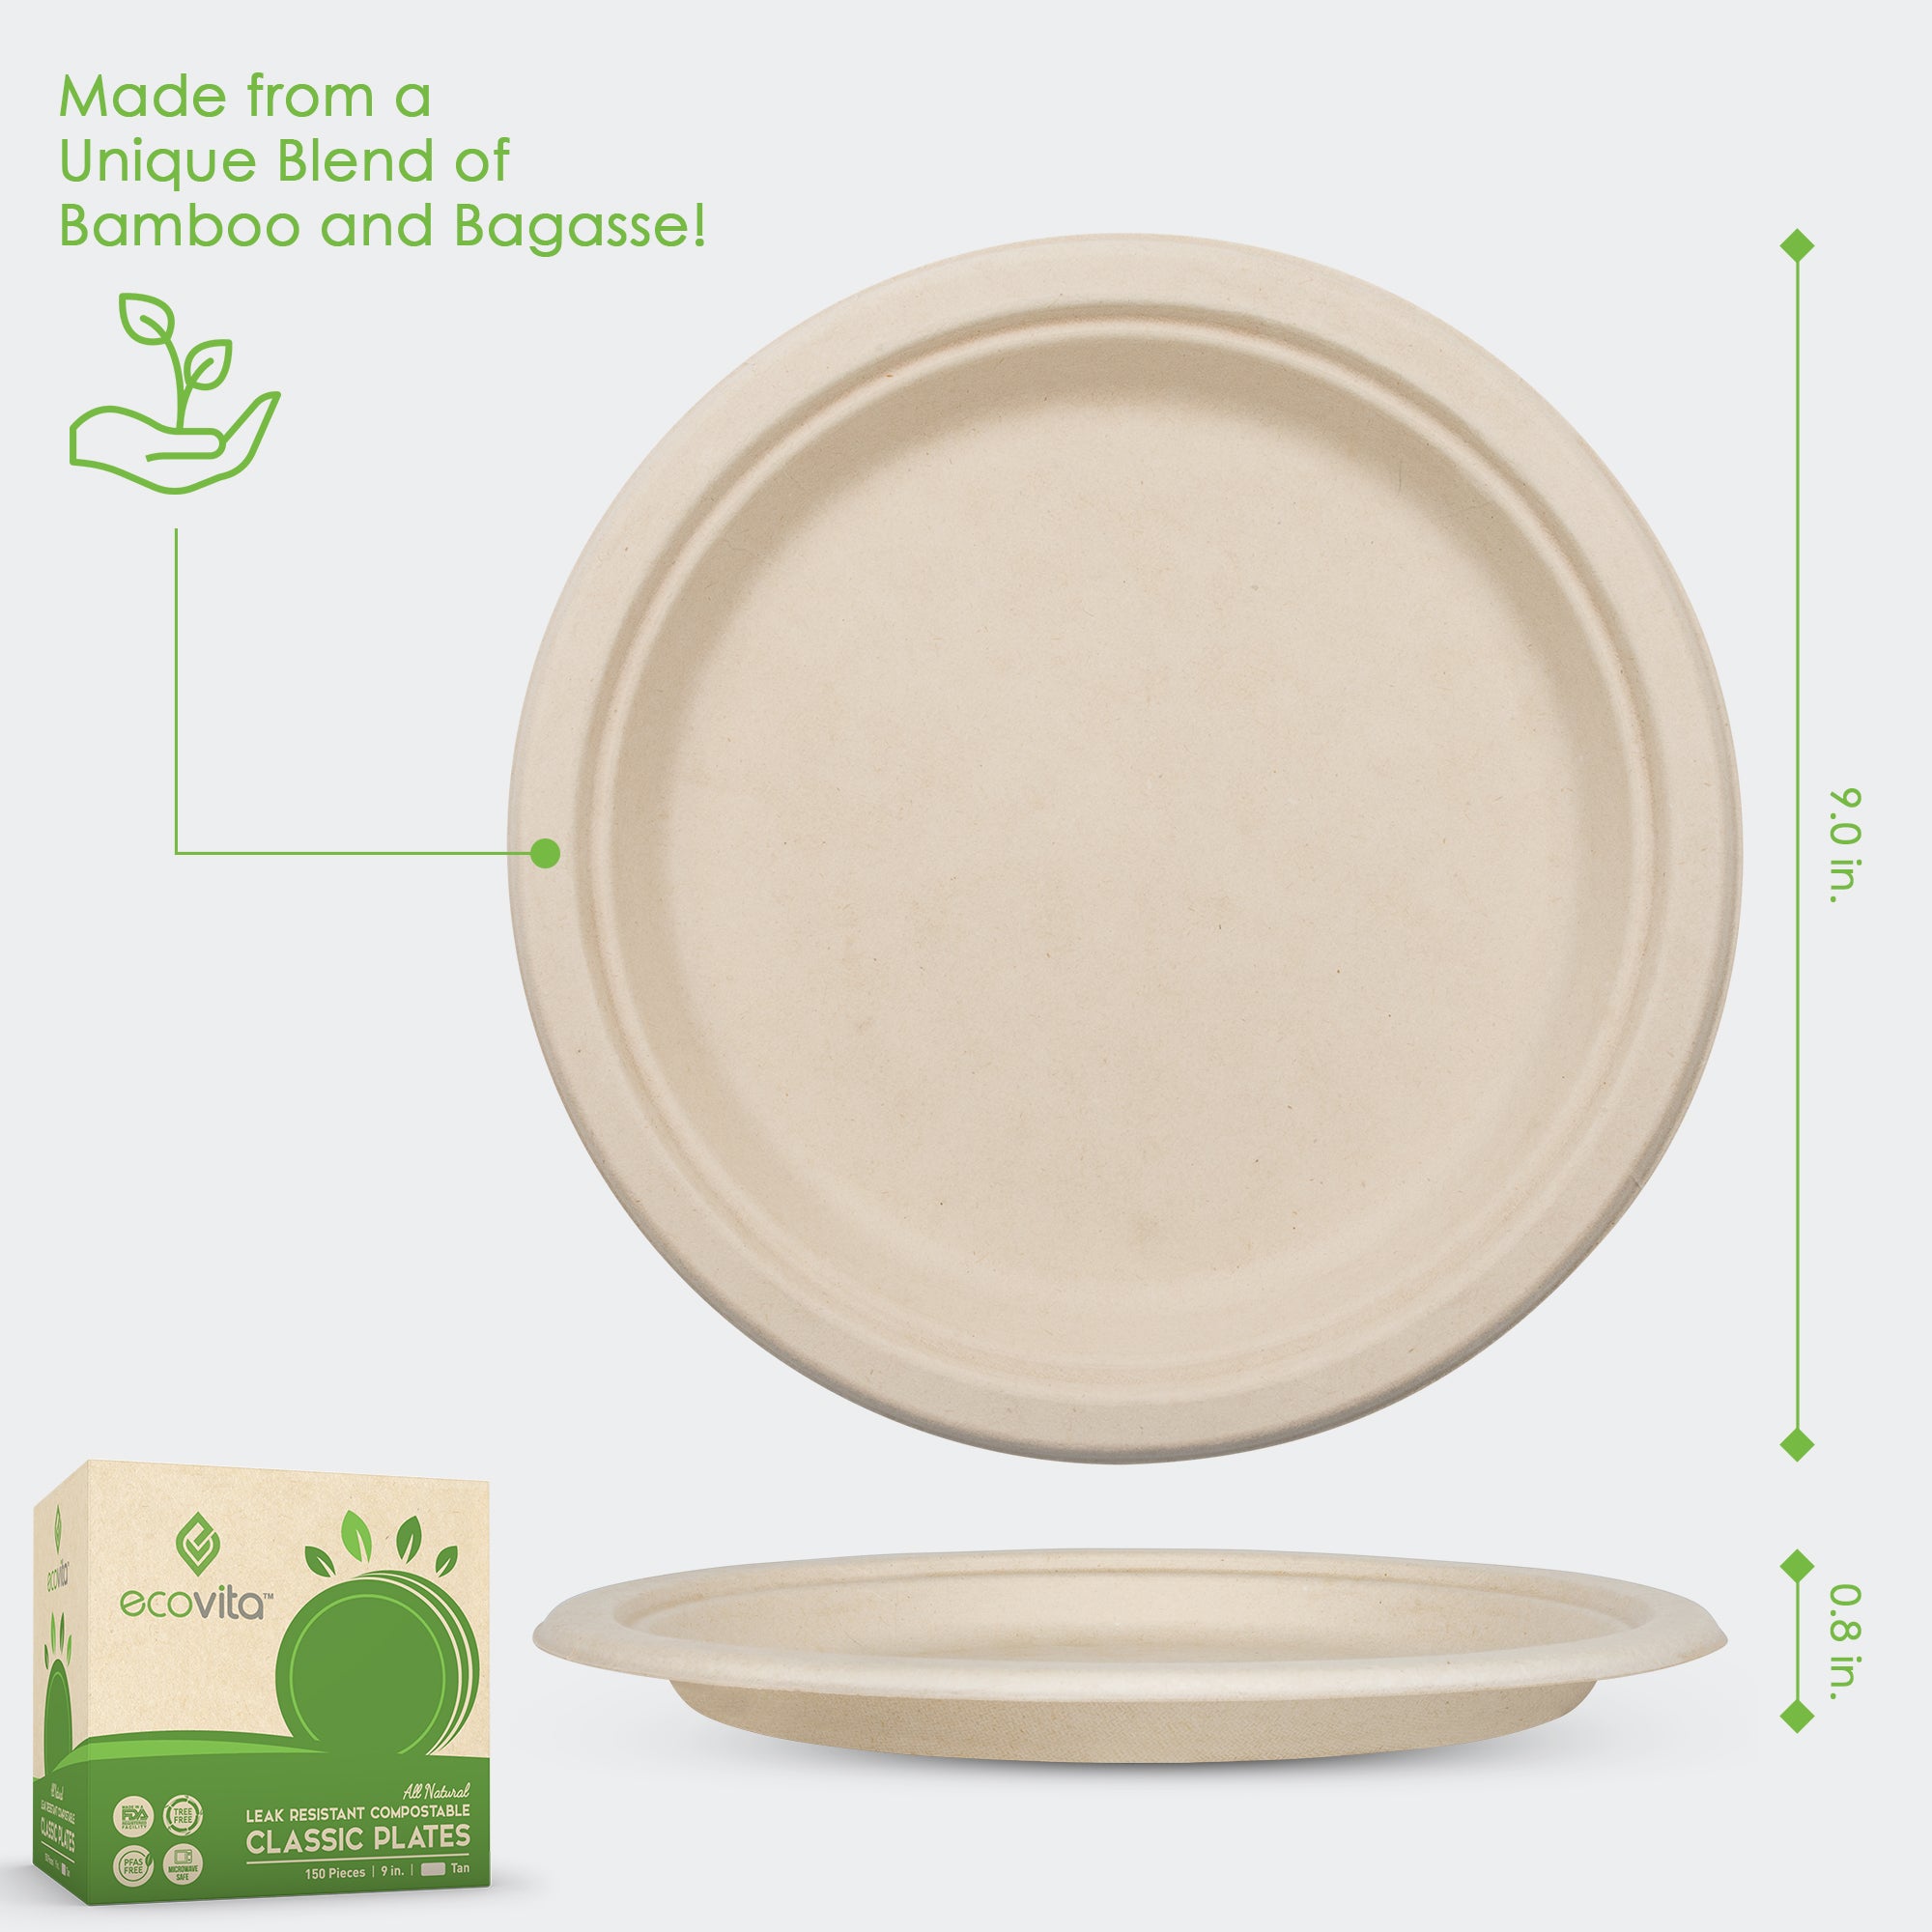 CHAHUA Degradable Disposable Tableware - Household eco-friendly